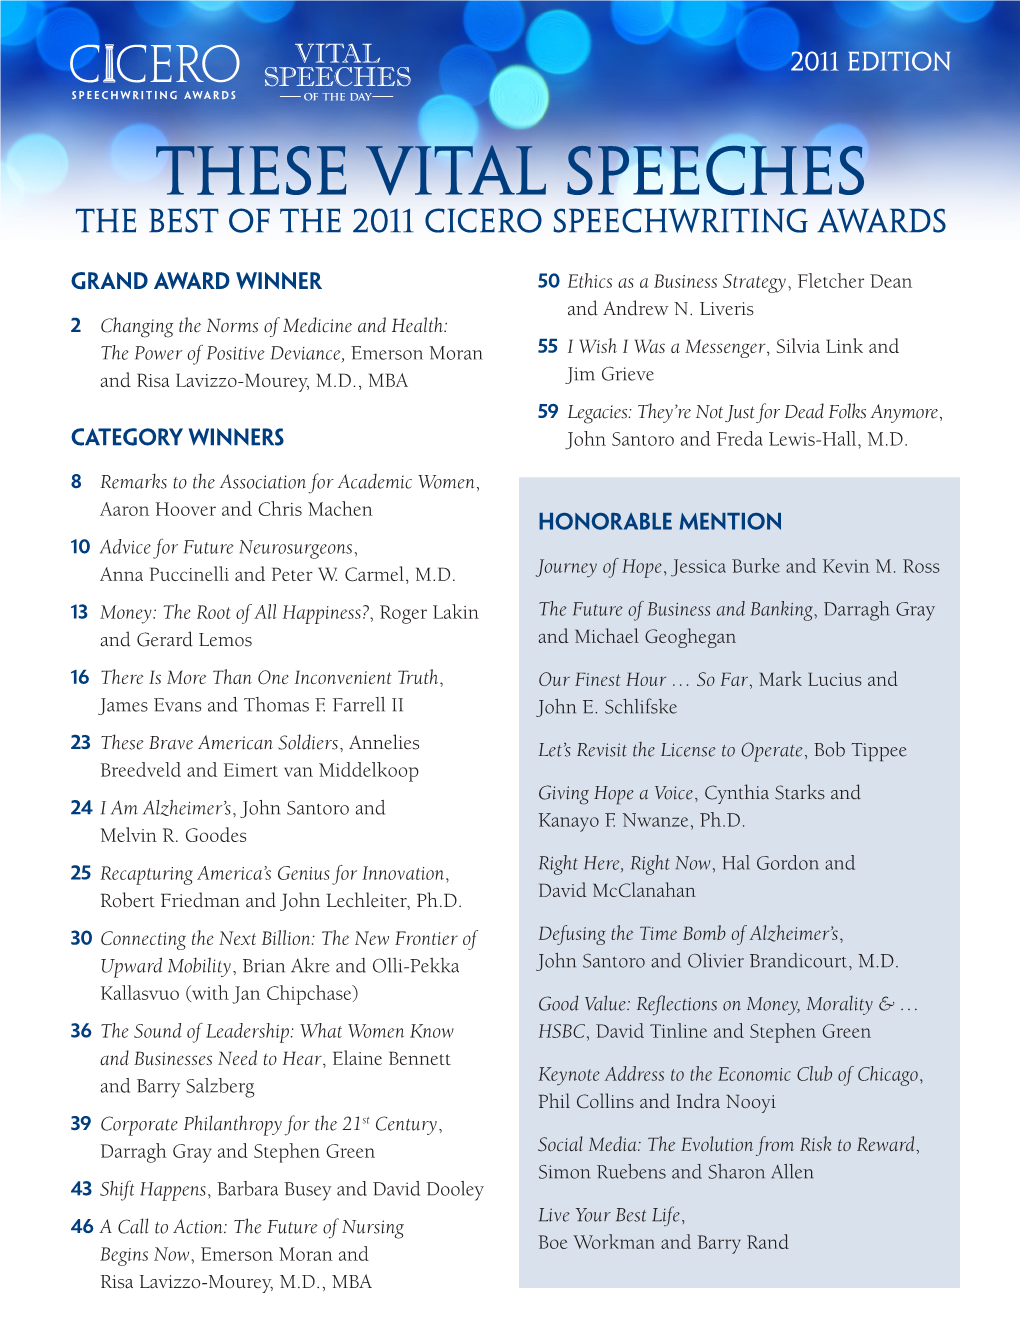 These Vital Speeches the Best of the 2011 Cicero Speechwriting Awards